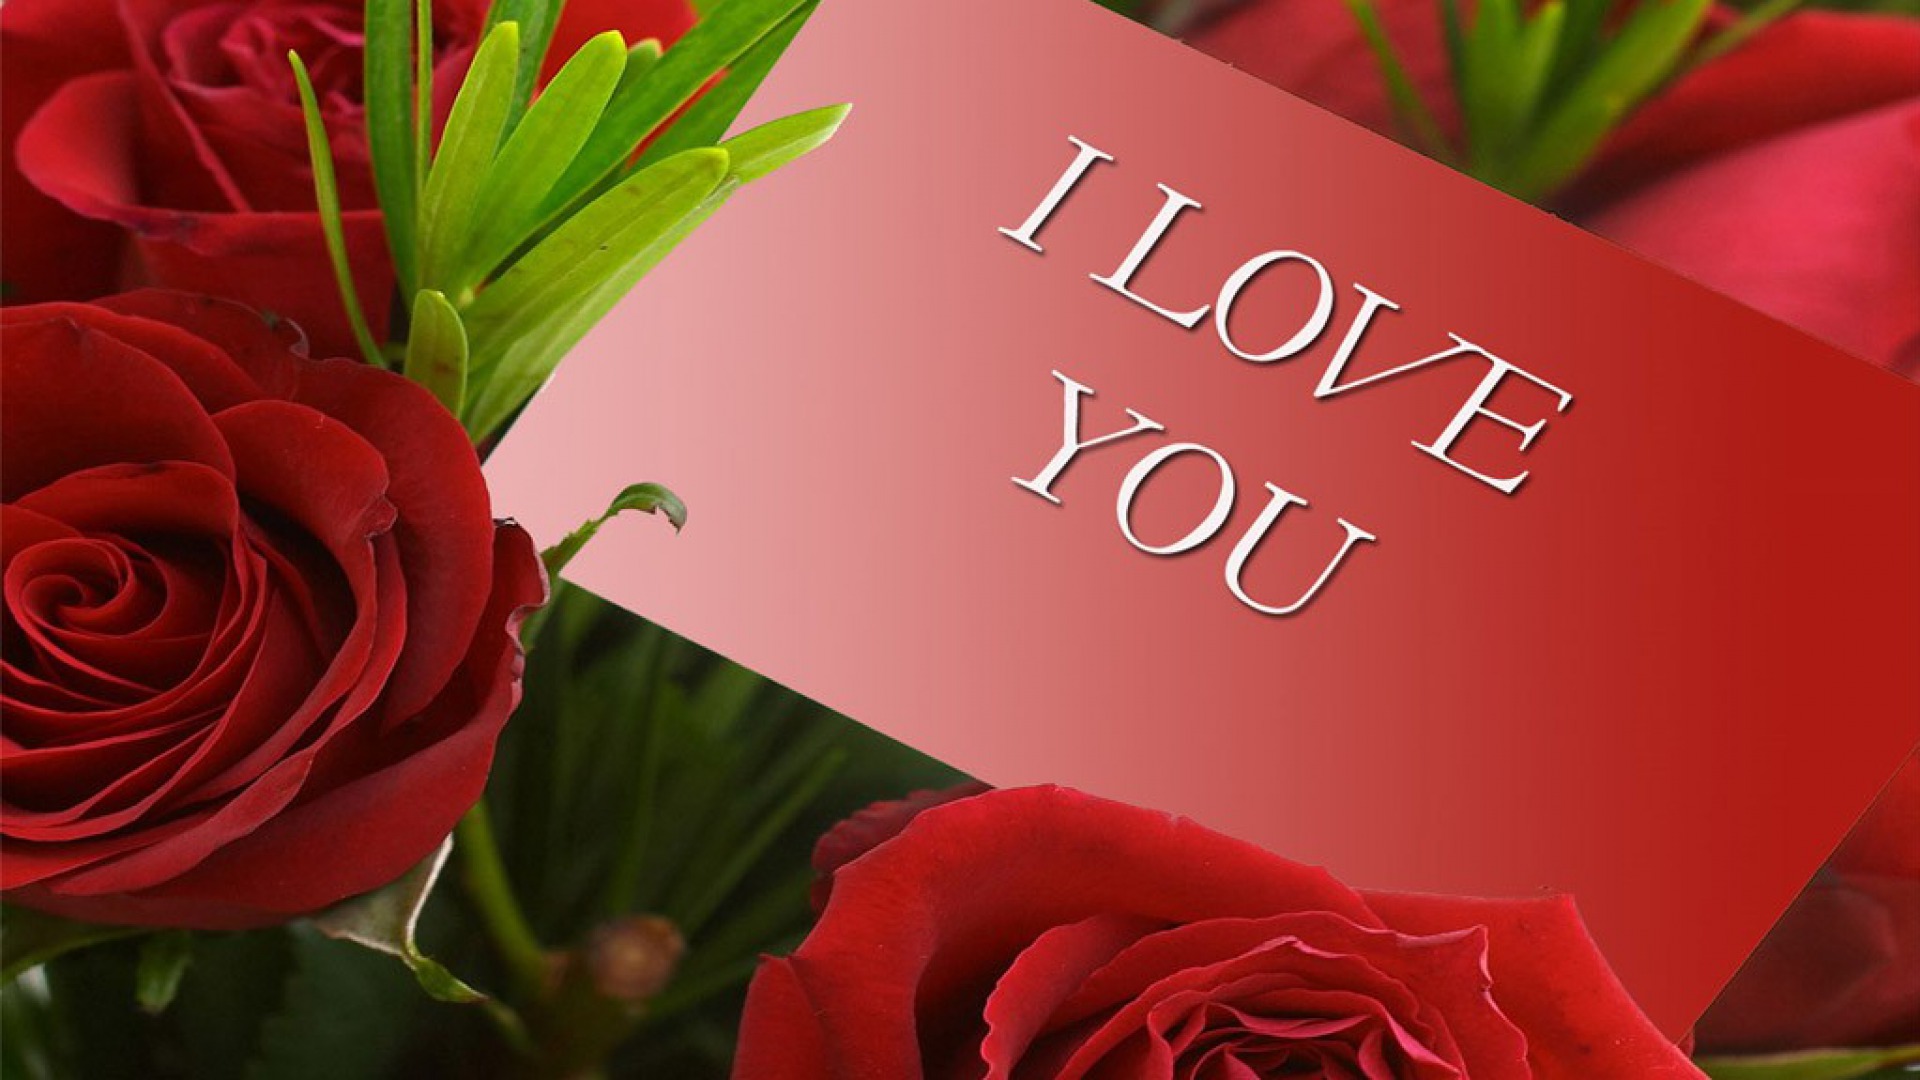 High Resolution I Love You Wallpaper Free Download Full Size ...